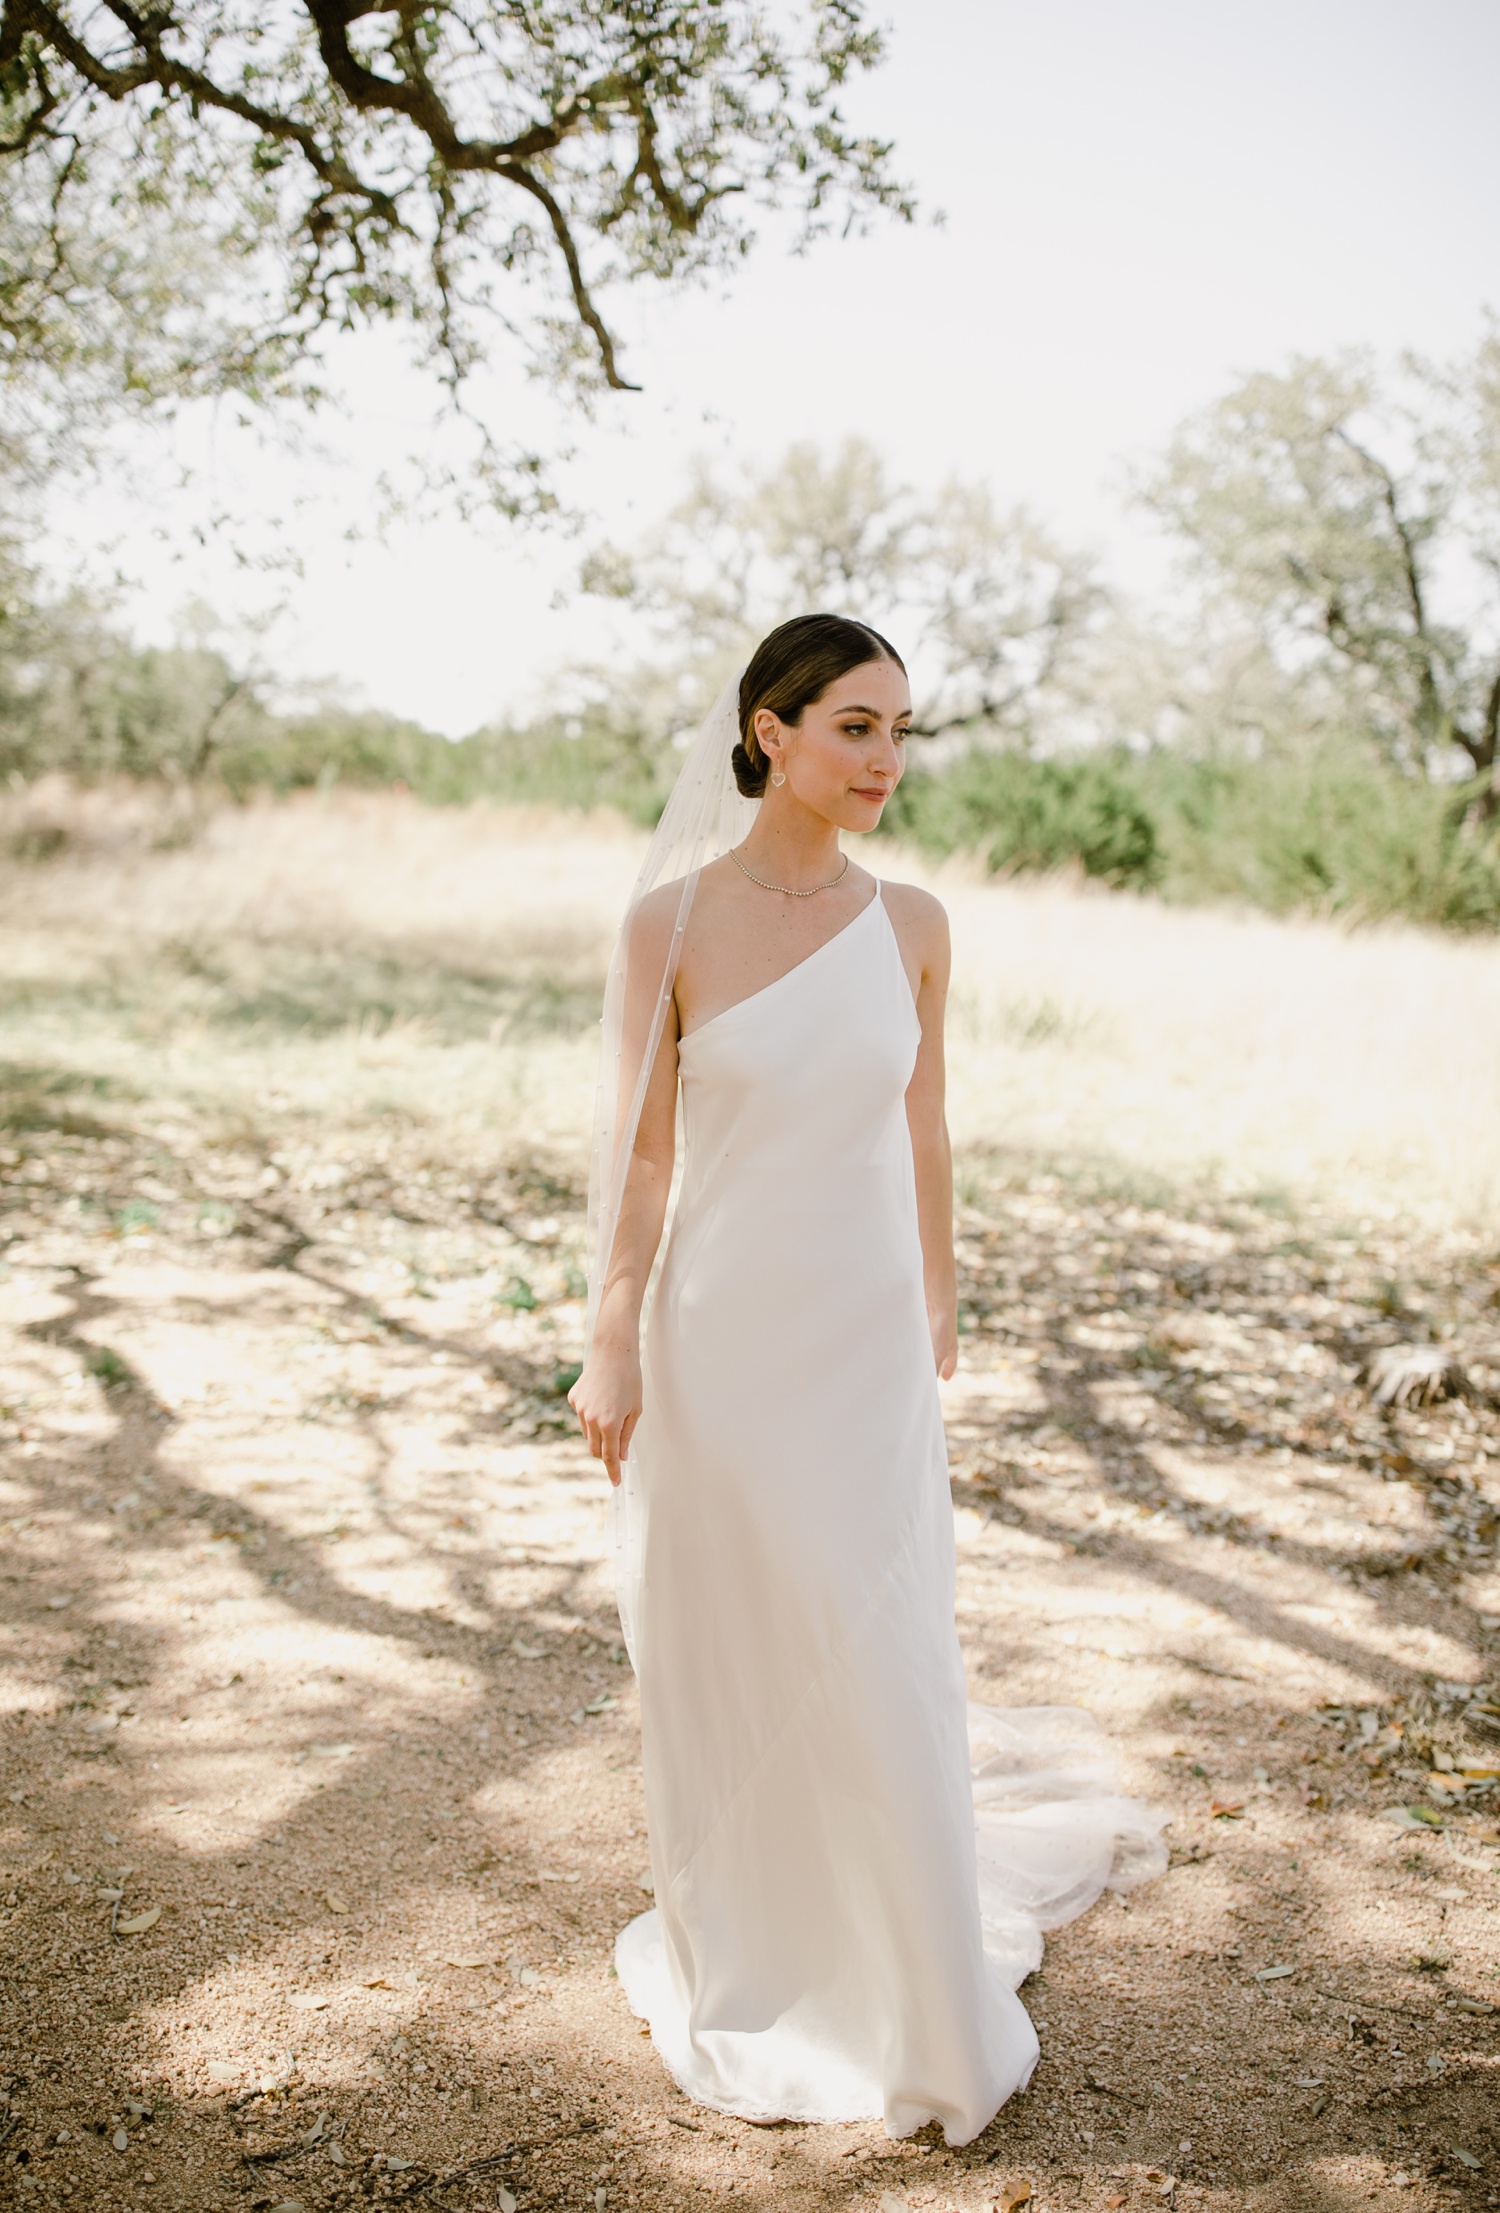 Bride in a one-shoulder slip-style wedding gown by A La Robe